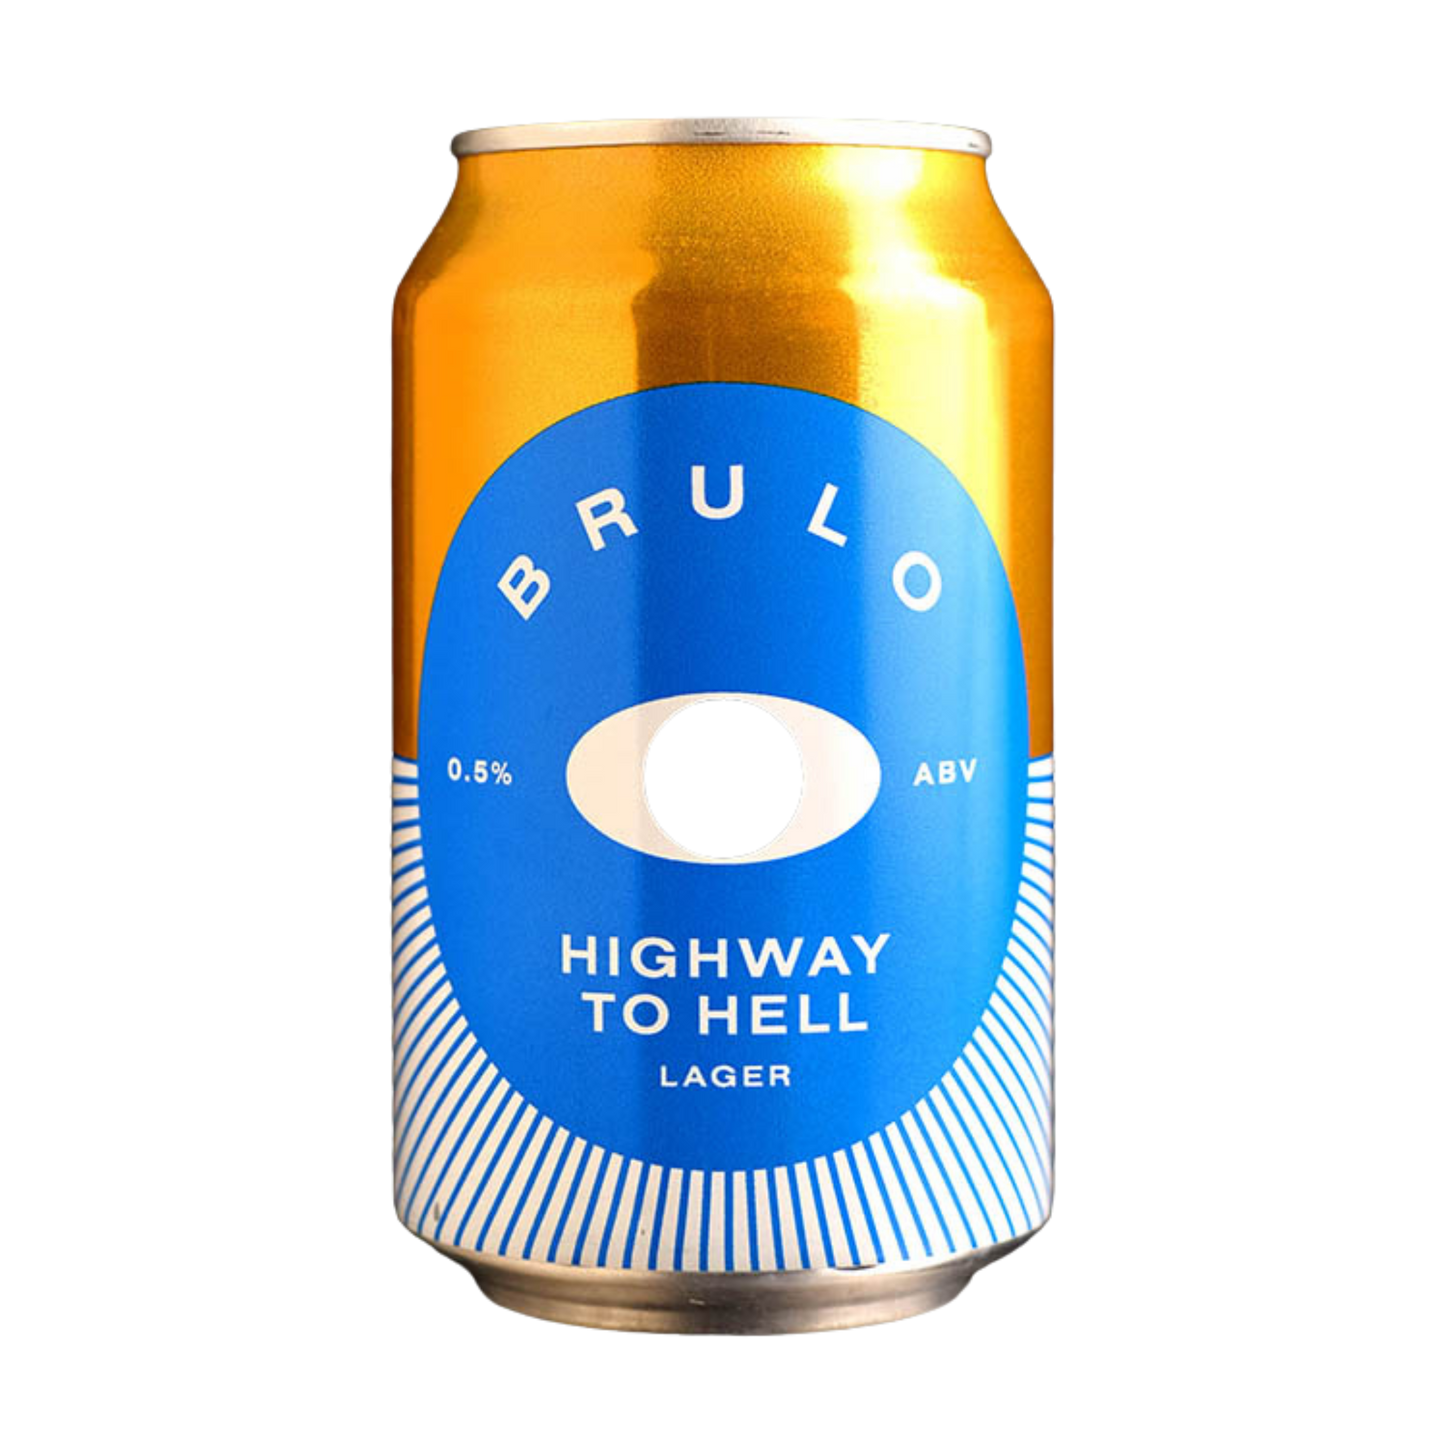 BRULO - HIGHWAY TO HELL 0,5% ALCOOL